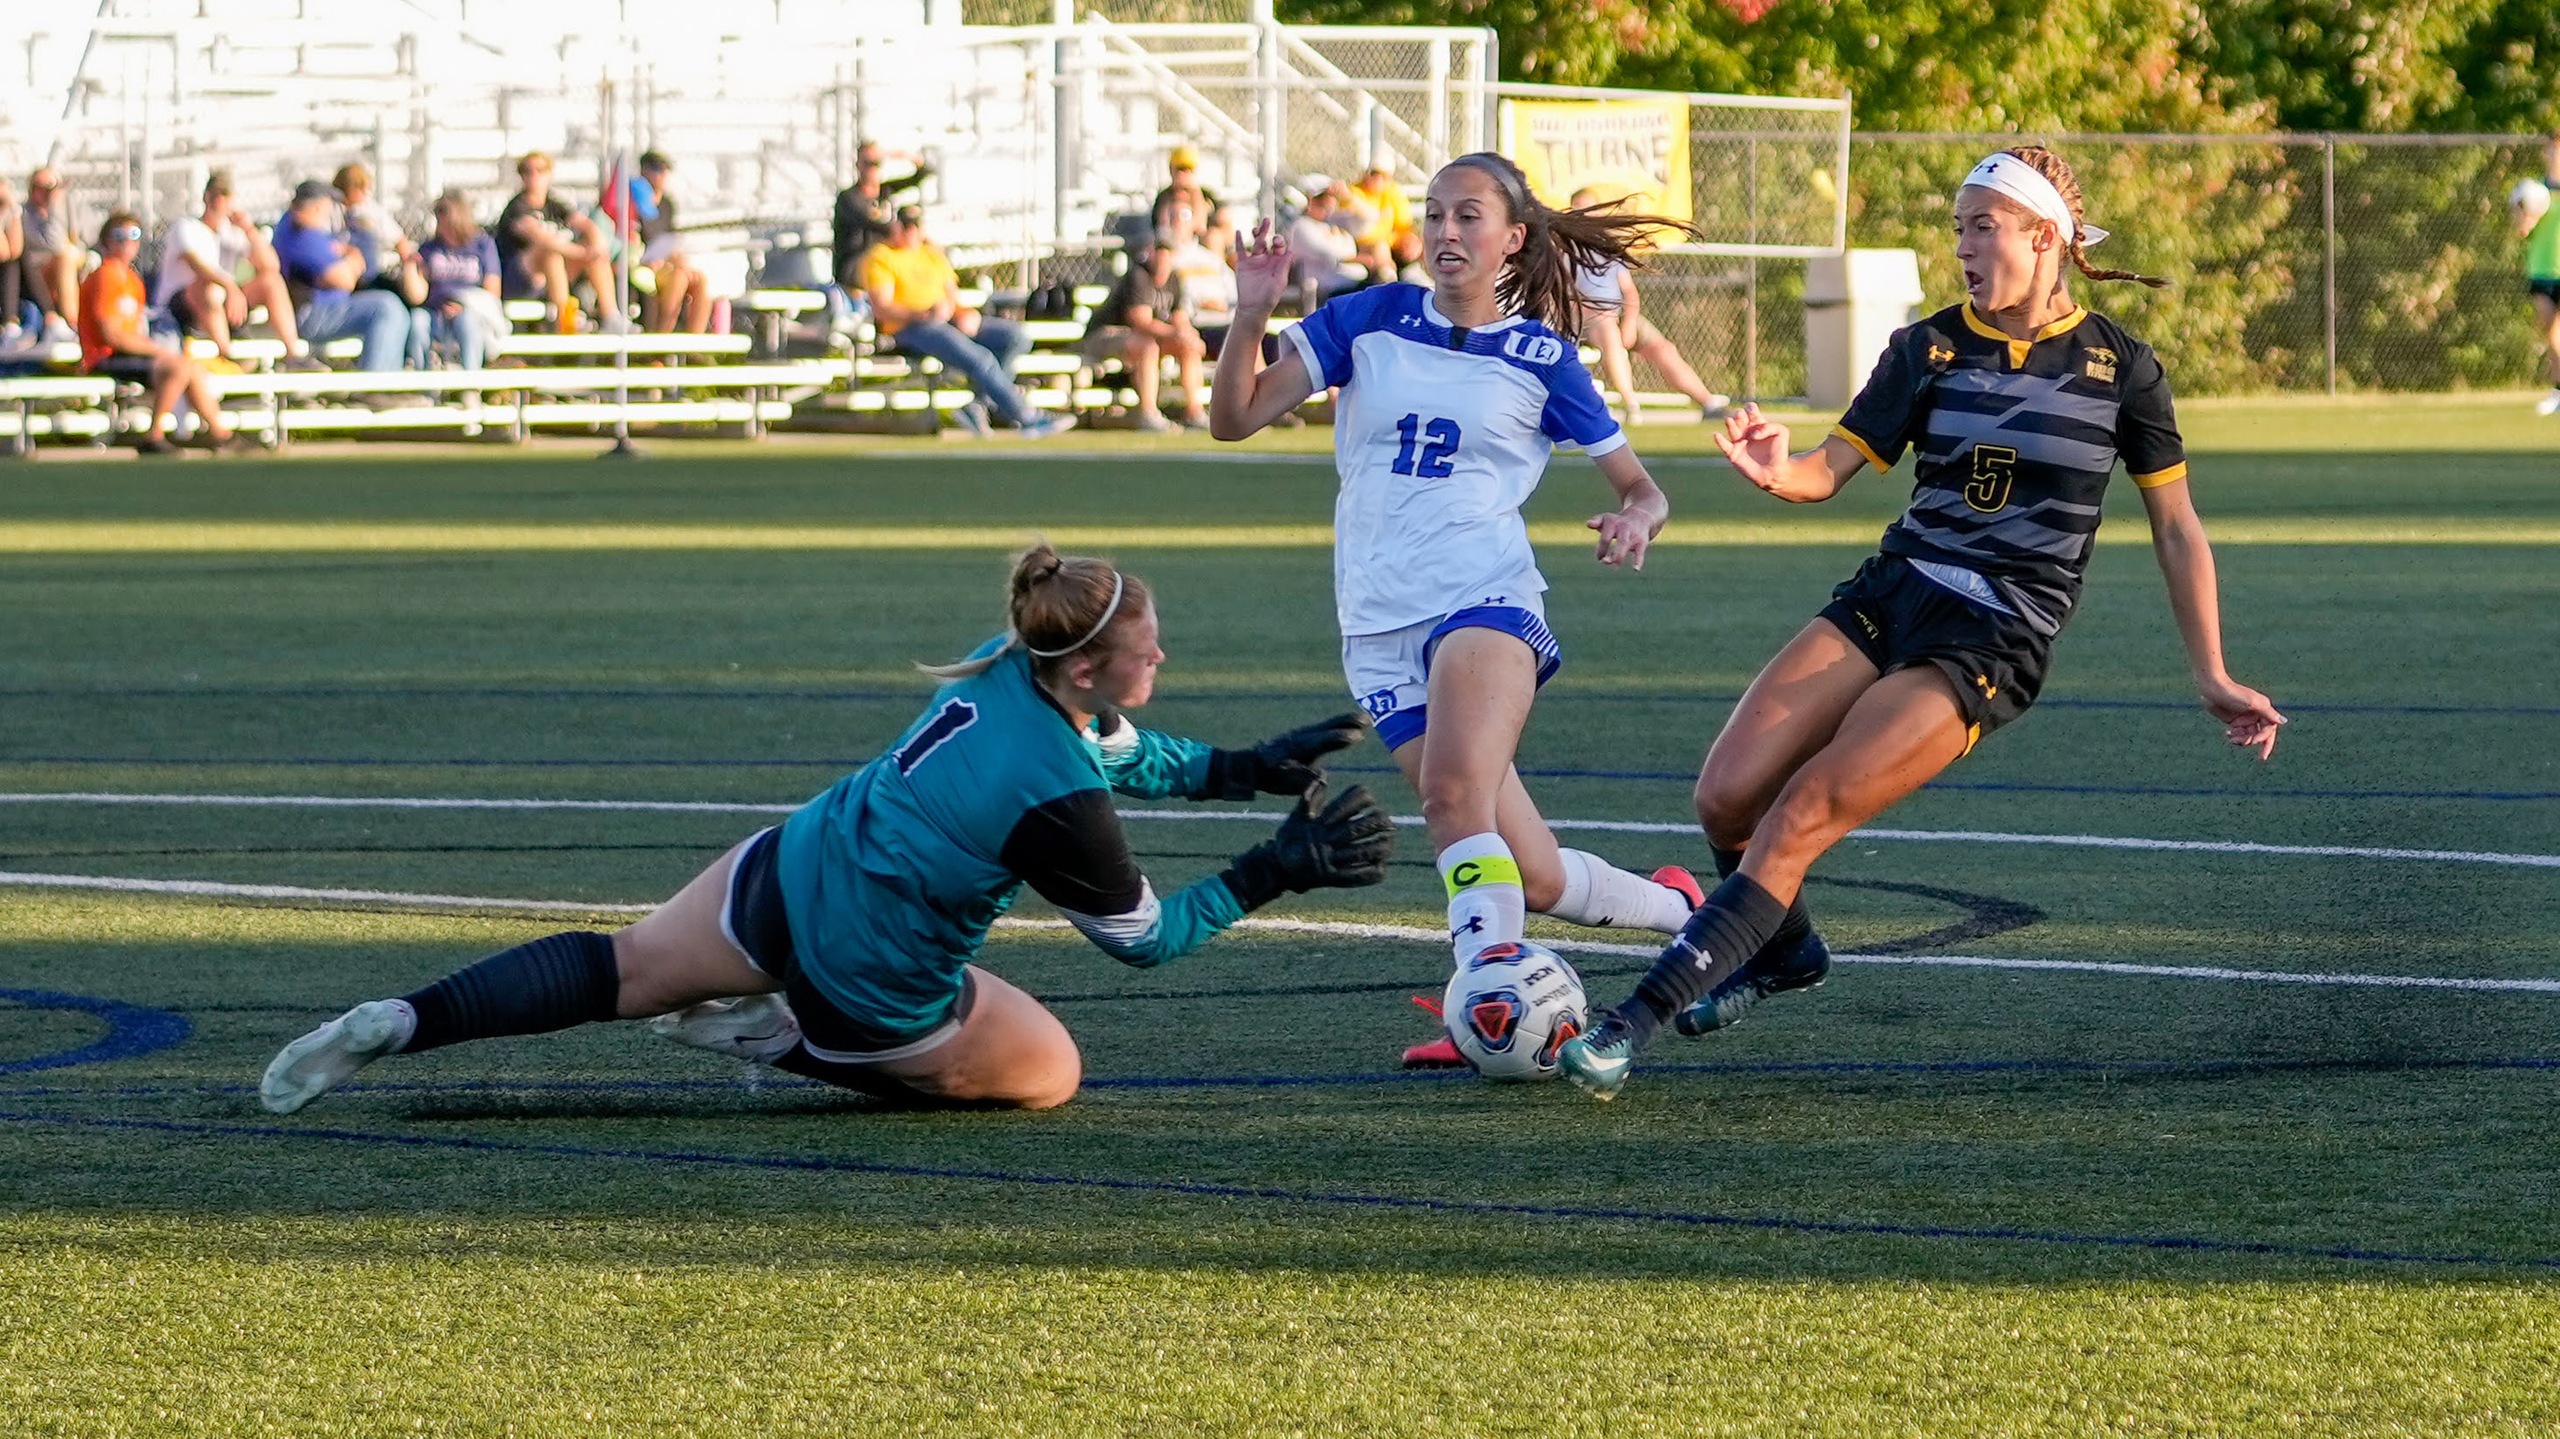 Alayna Clark's first career goal was a match winner for the Titans.